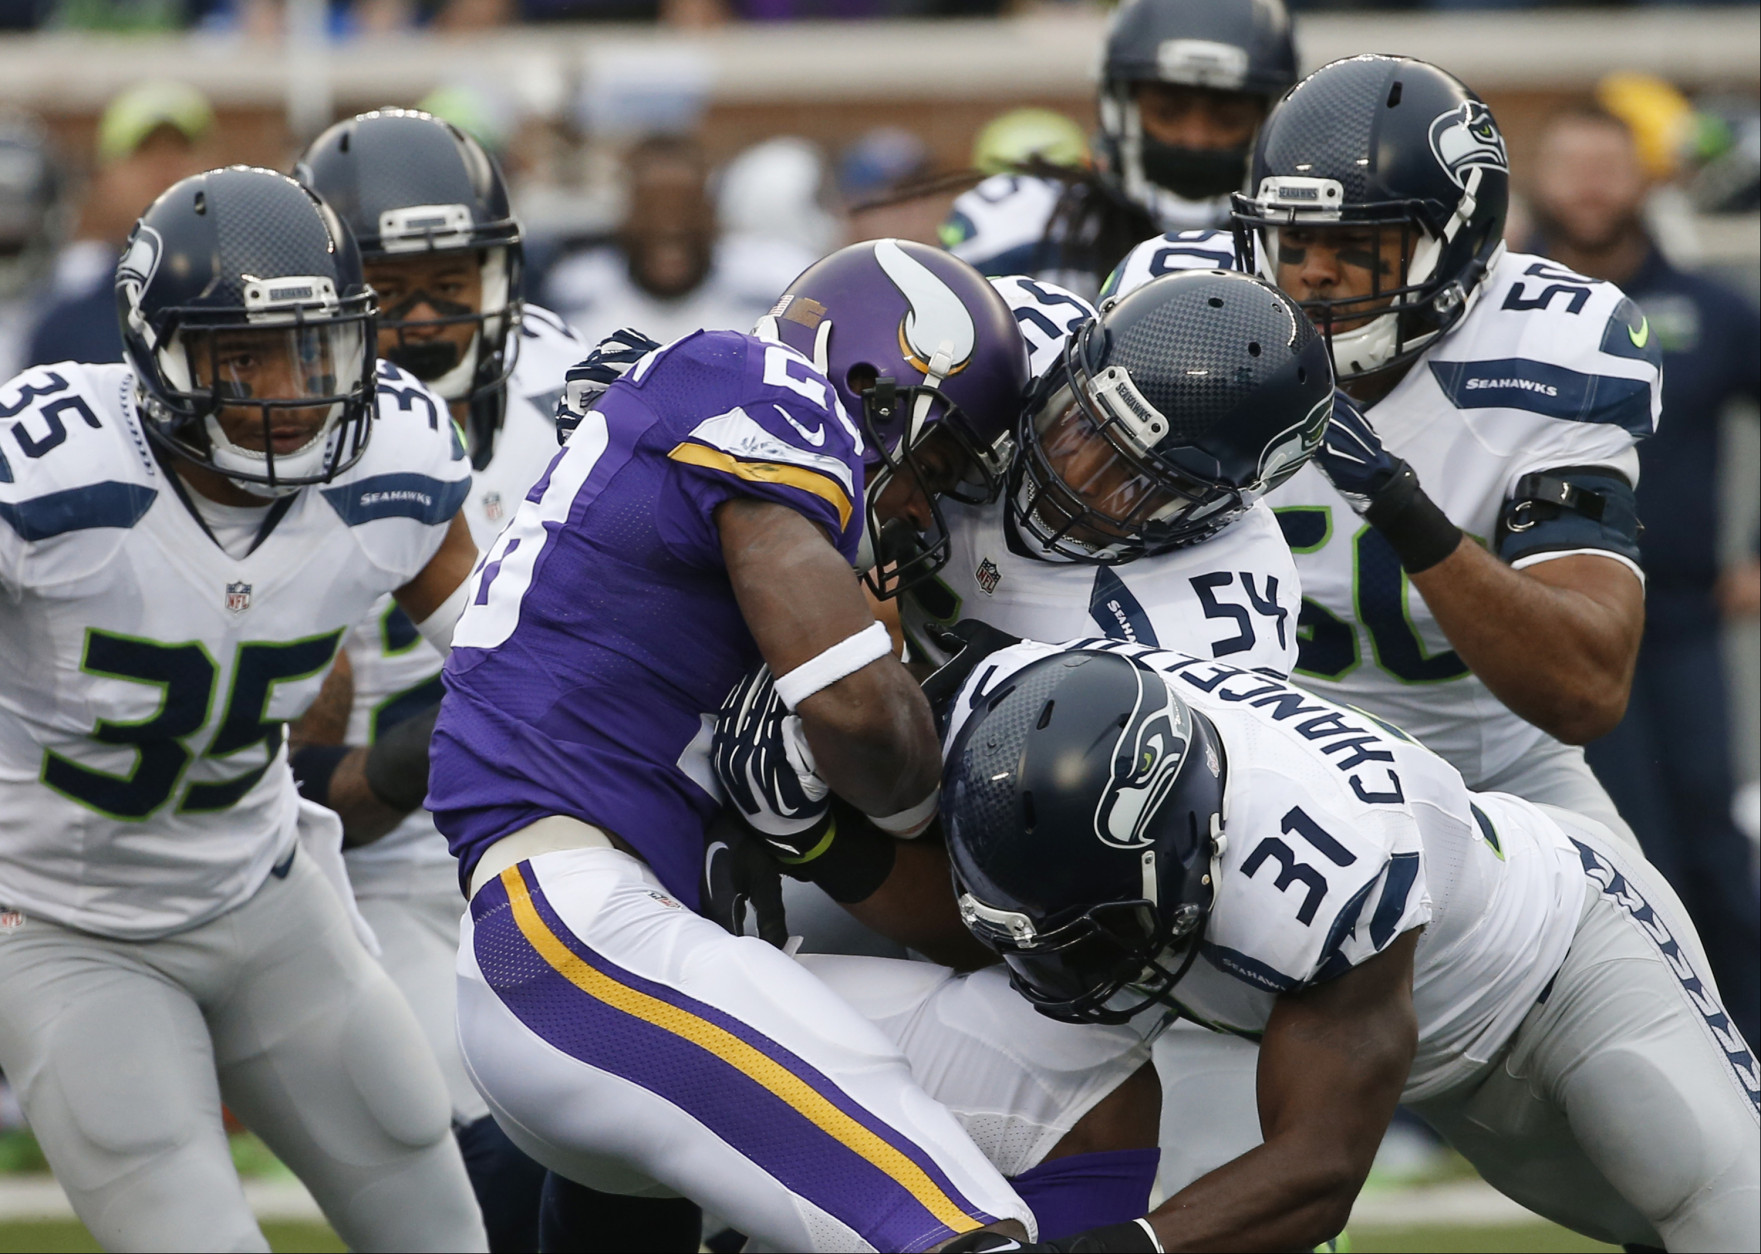 Minnesota Vikings running back Adrian Peterson (28) is stopped by Seattle Seahawks defenders including  linebacker Bobby Wagner (54) and strong safety Kam Chancellor (31)in the first half of an NFL football game Sunday, Dec. 6, 2015 in Minneapolis. (AP Photo/Ann Heisenfelt)